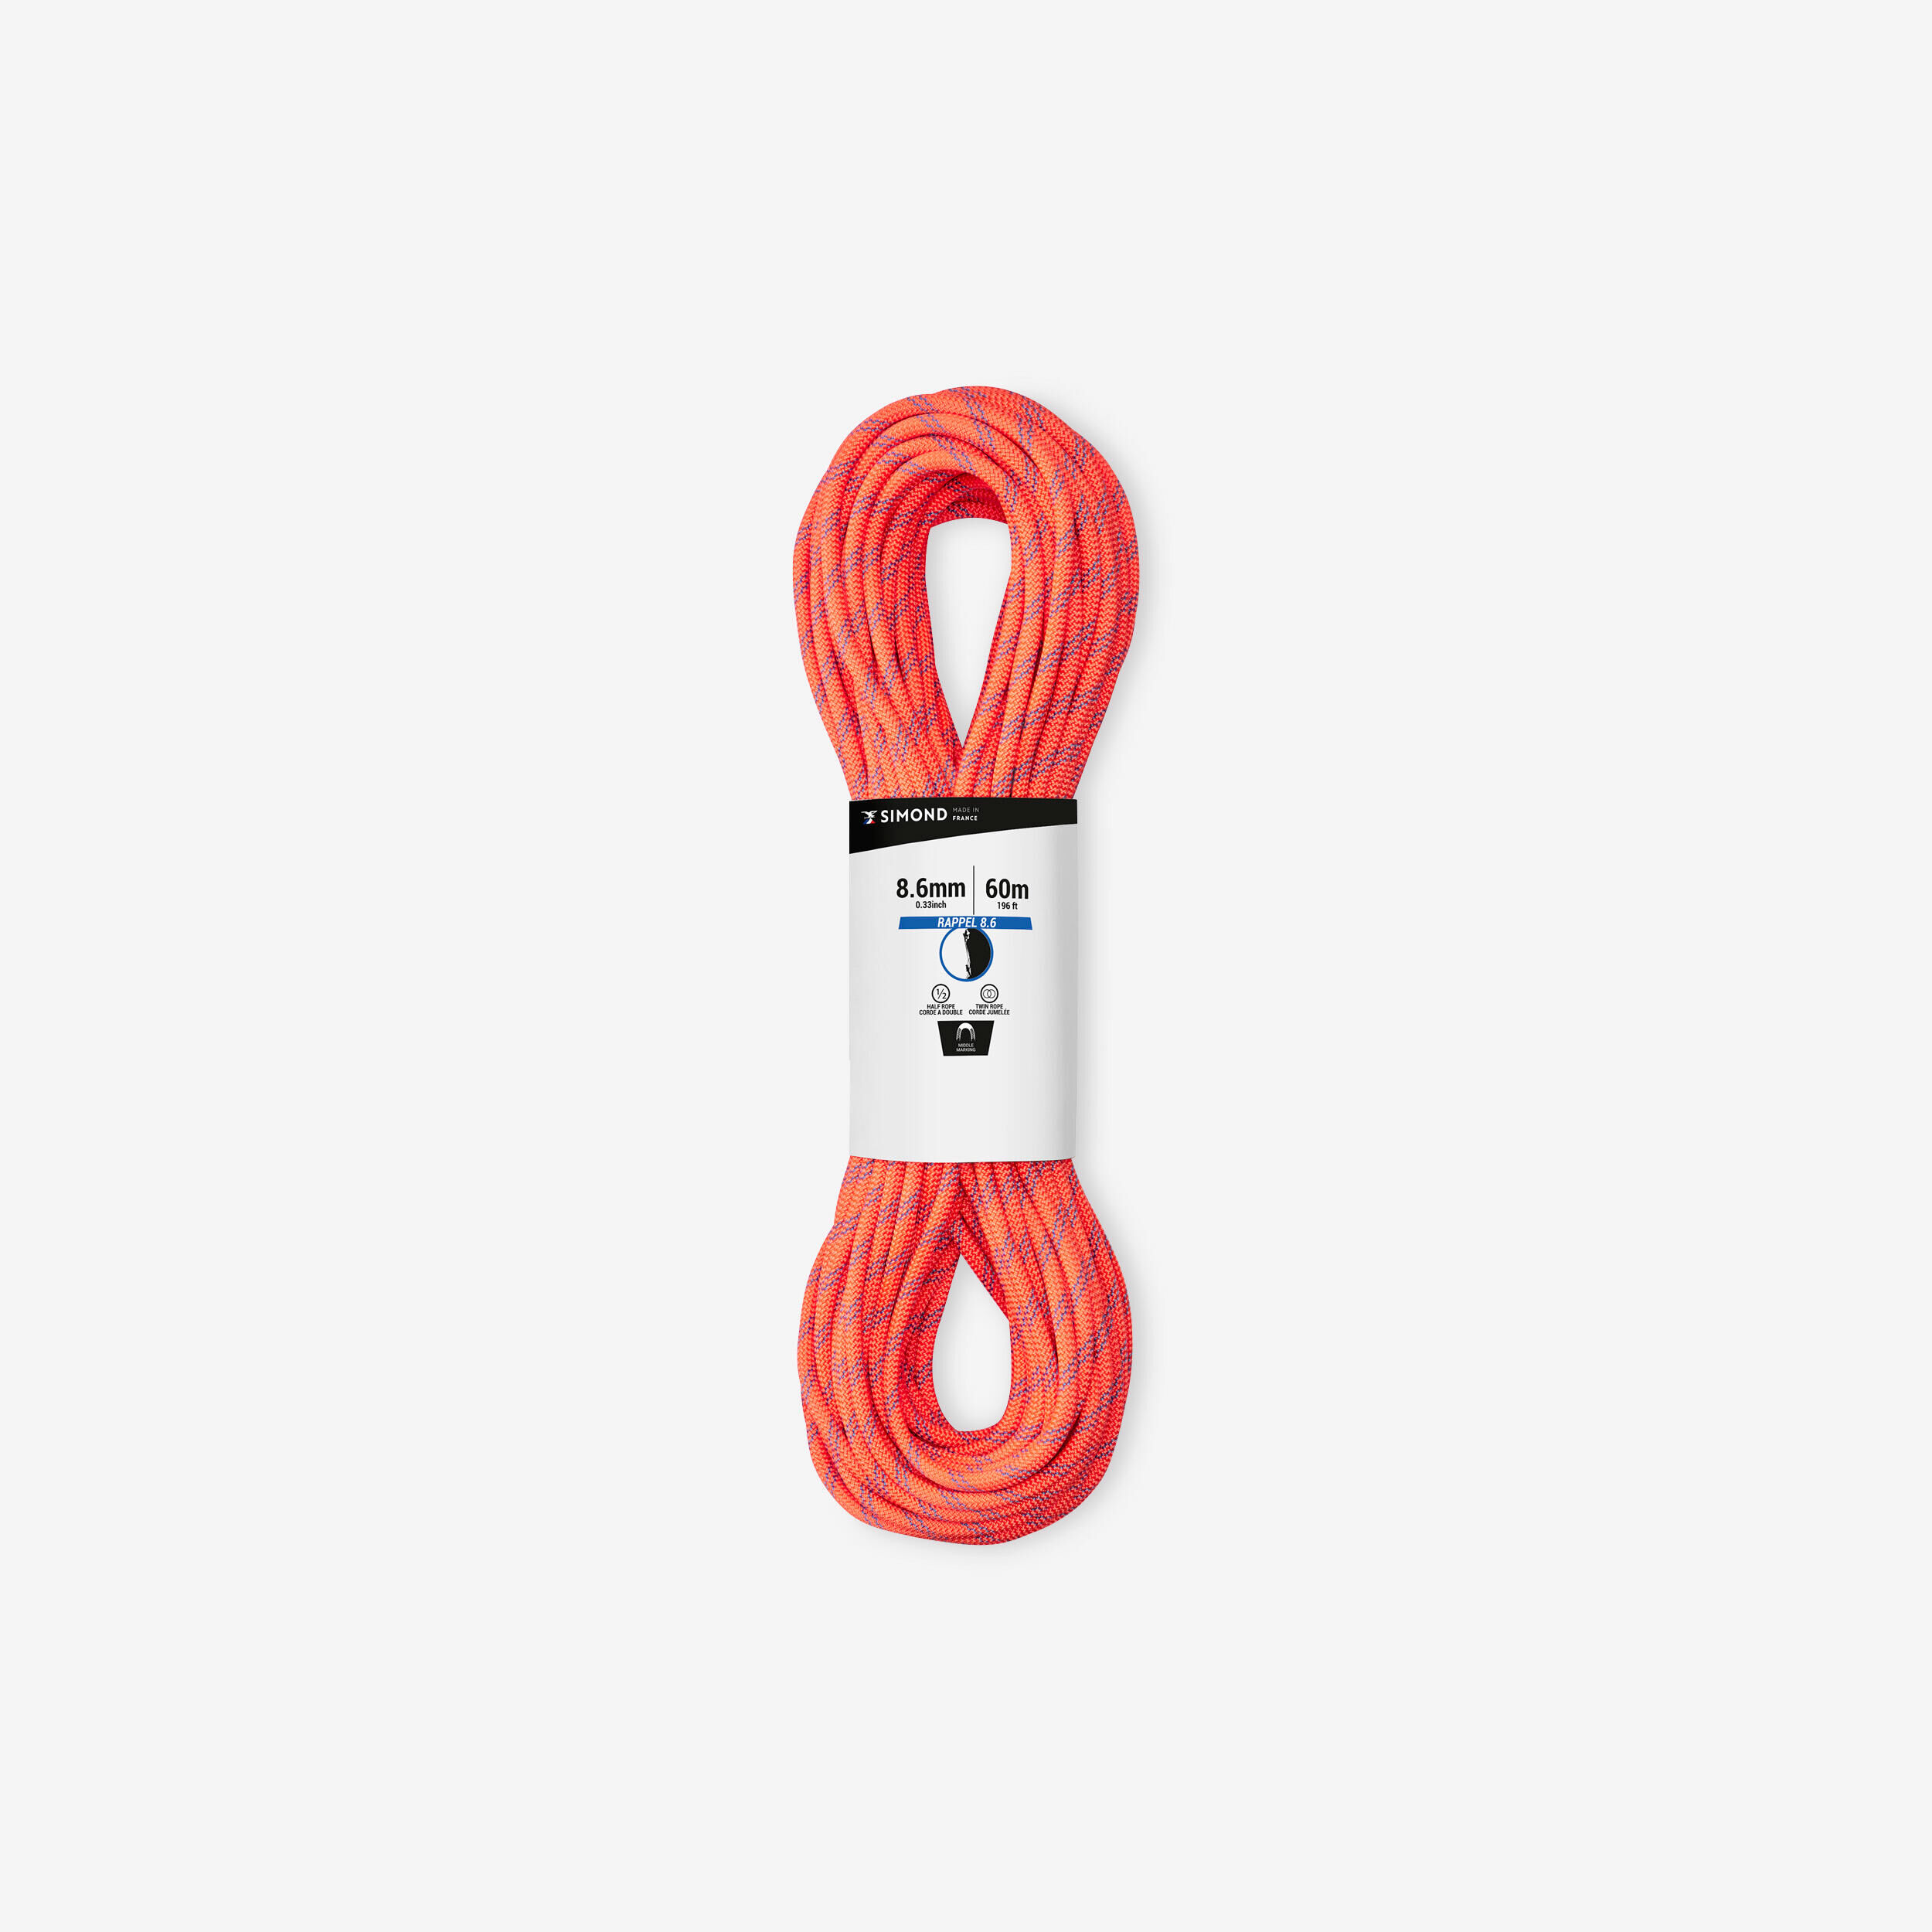 SIMOND Double climbing and mountaineering rope 8.6 mm x 60 m - RAPPEL 8.6 orange